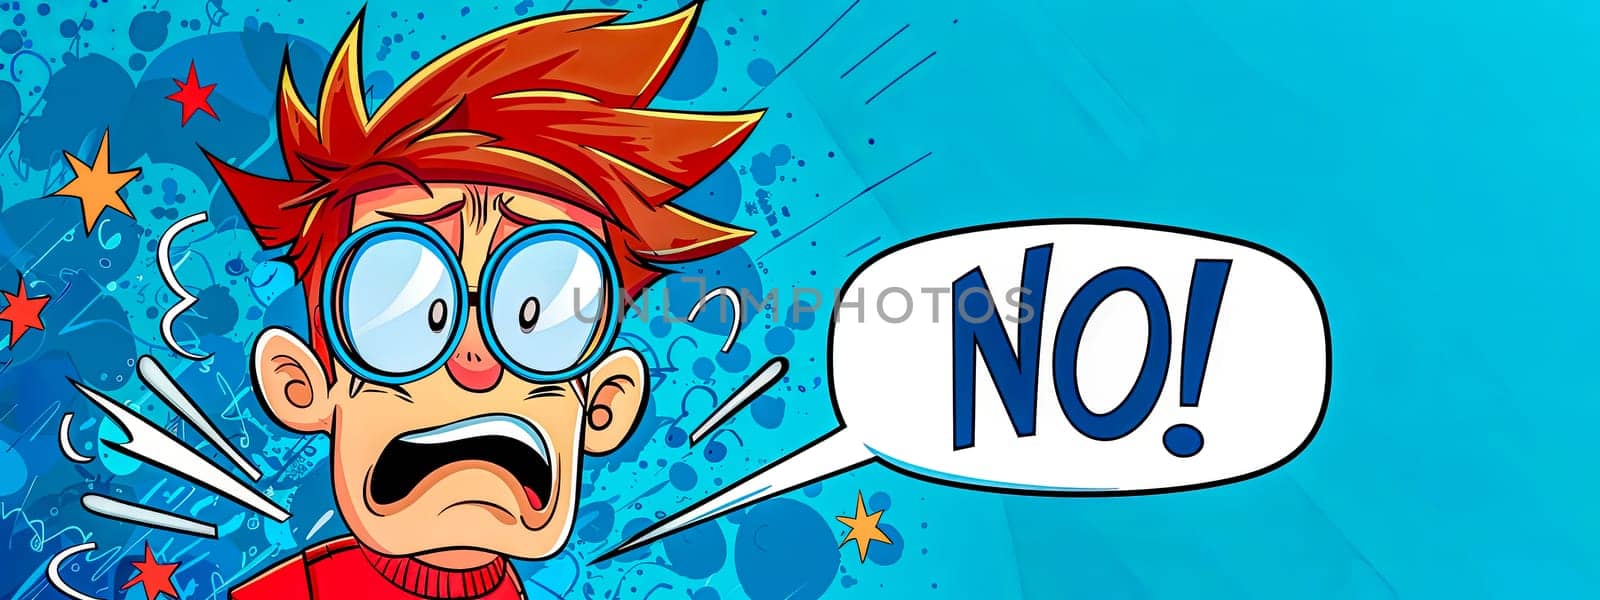 Cartoon boy expressing disagreement with no! speech bubble by Edophoto